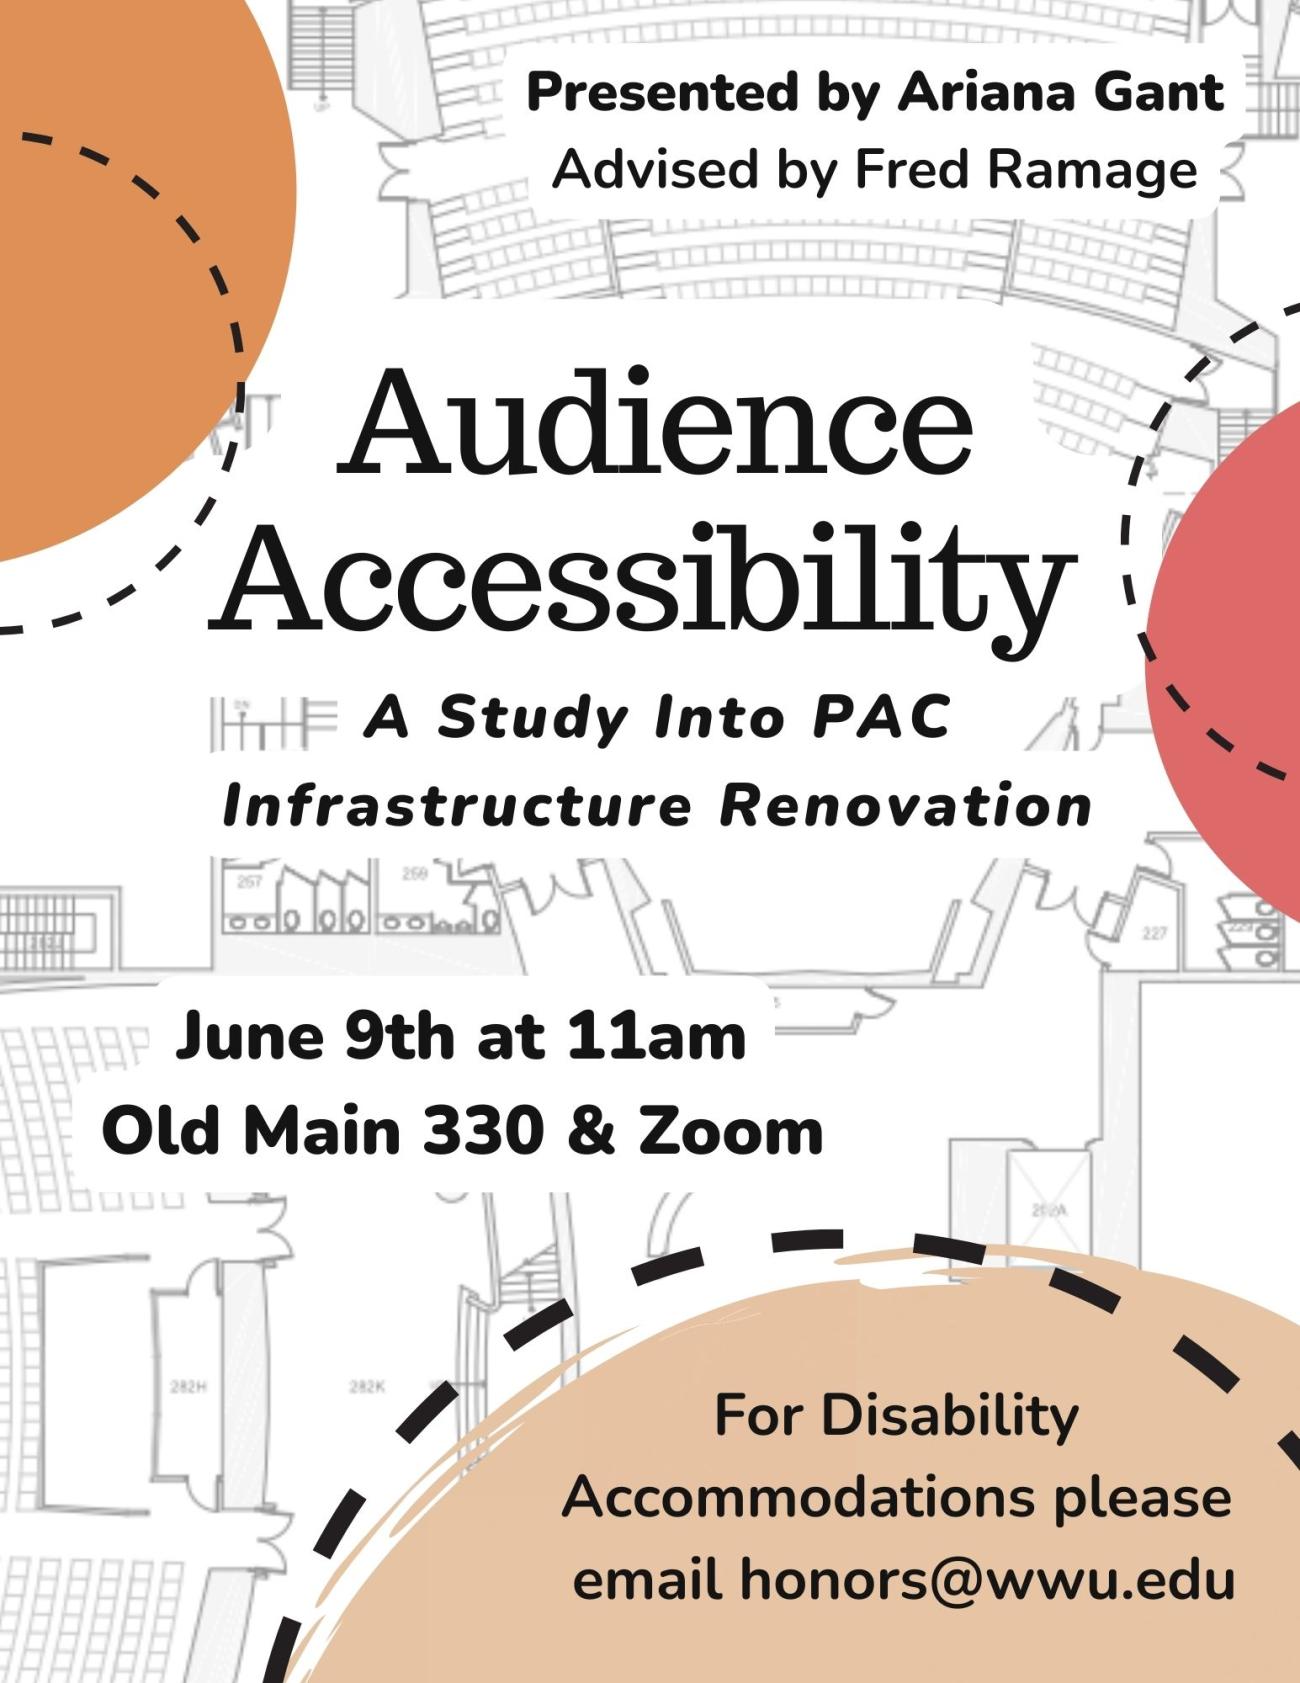 Background is displaying the floorplan of the WWU Performing Arts Center with 3 multicolored decorative semi-circles framing the poster. Text reads "Presented by Ariana Gant, Advised by Fred Ramage. Audience Accessibility. A Study Into PAC Infrastructure Renovation. June 9th at 11am, OM330 & Zoom. For Disability Accommodations please email honors@wwu.edu."